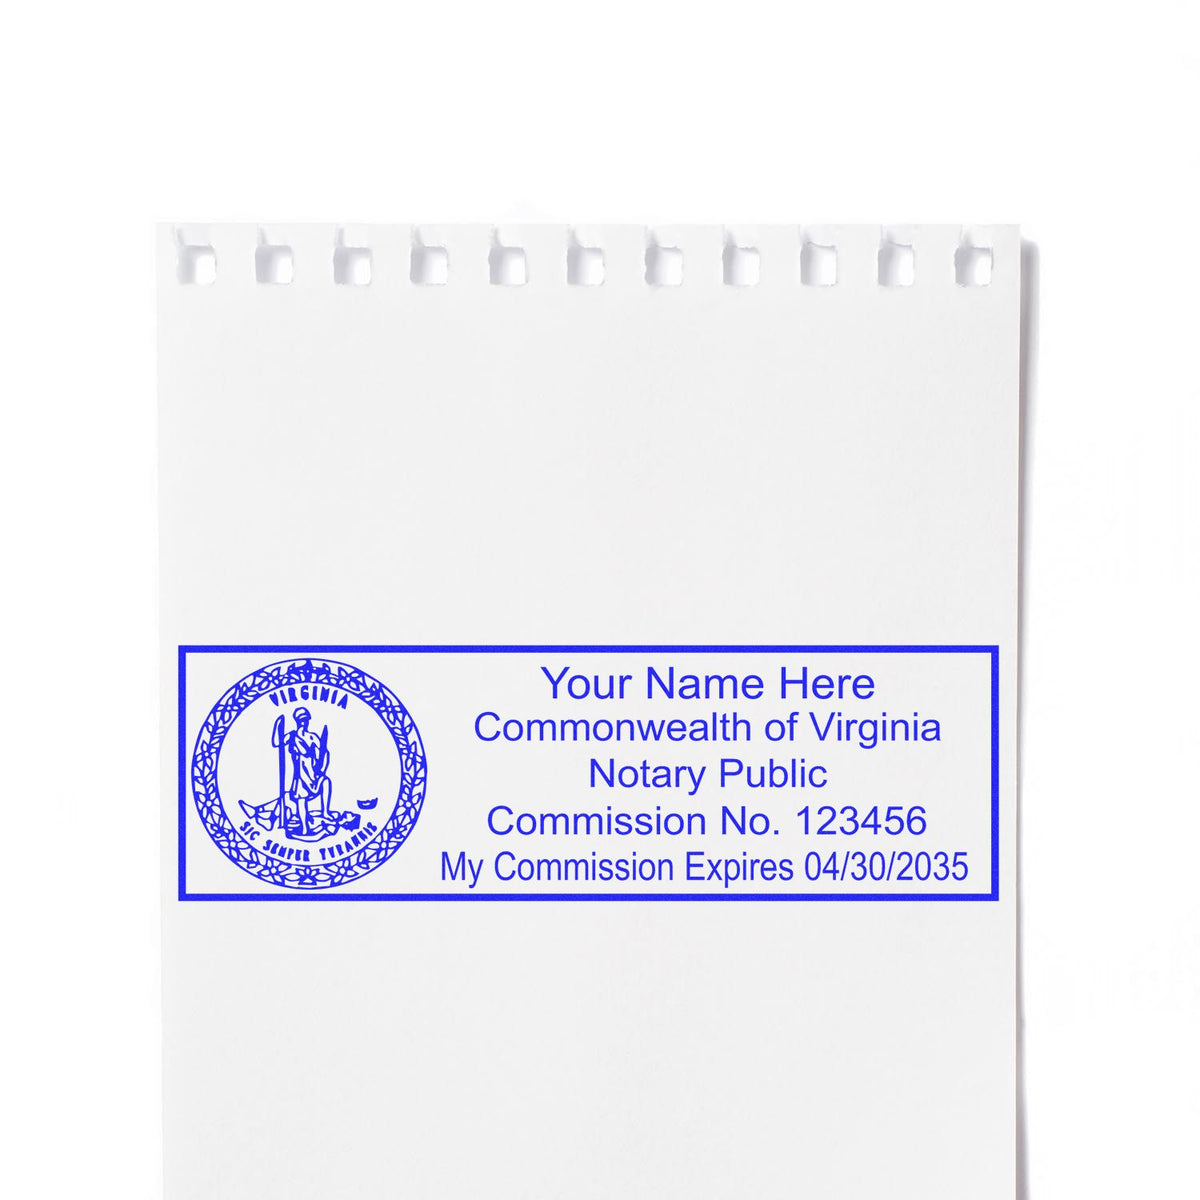 This paper is stamped with a sample imprint of the Wooden Handle Virginia State Seal Notary Public Stamp, signifying its quality and reliability.